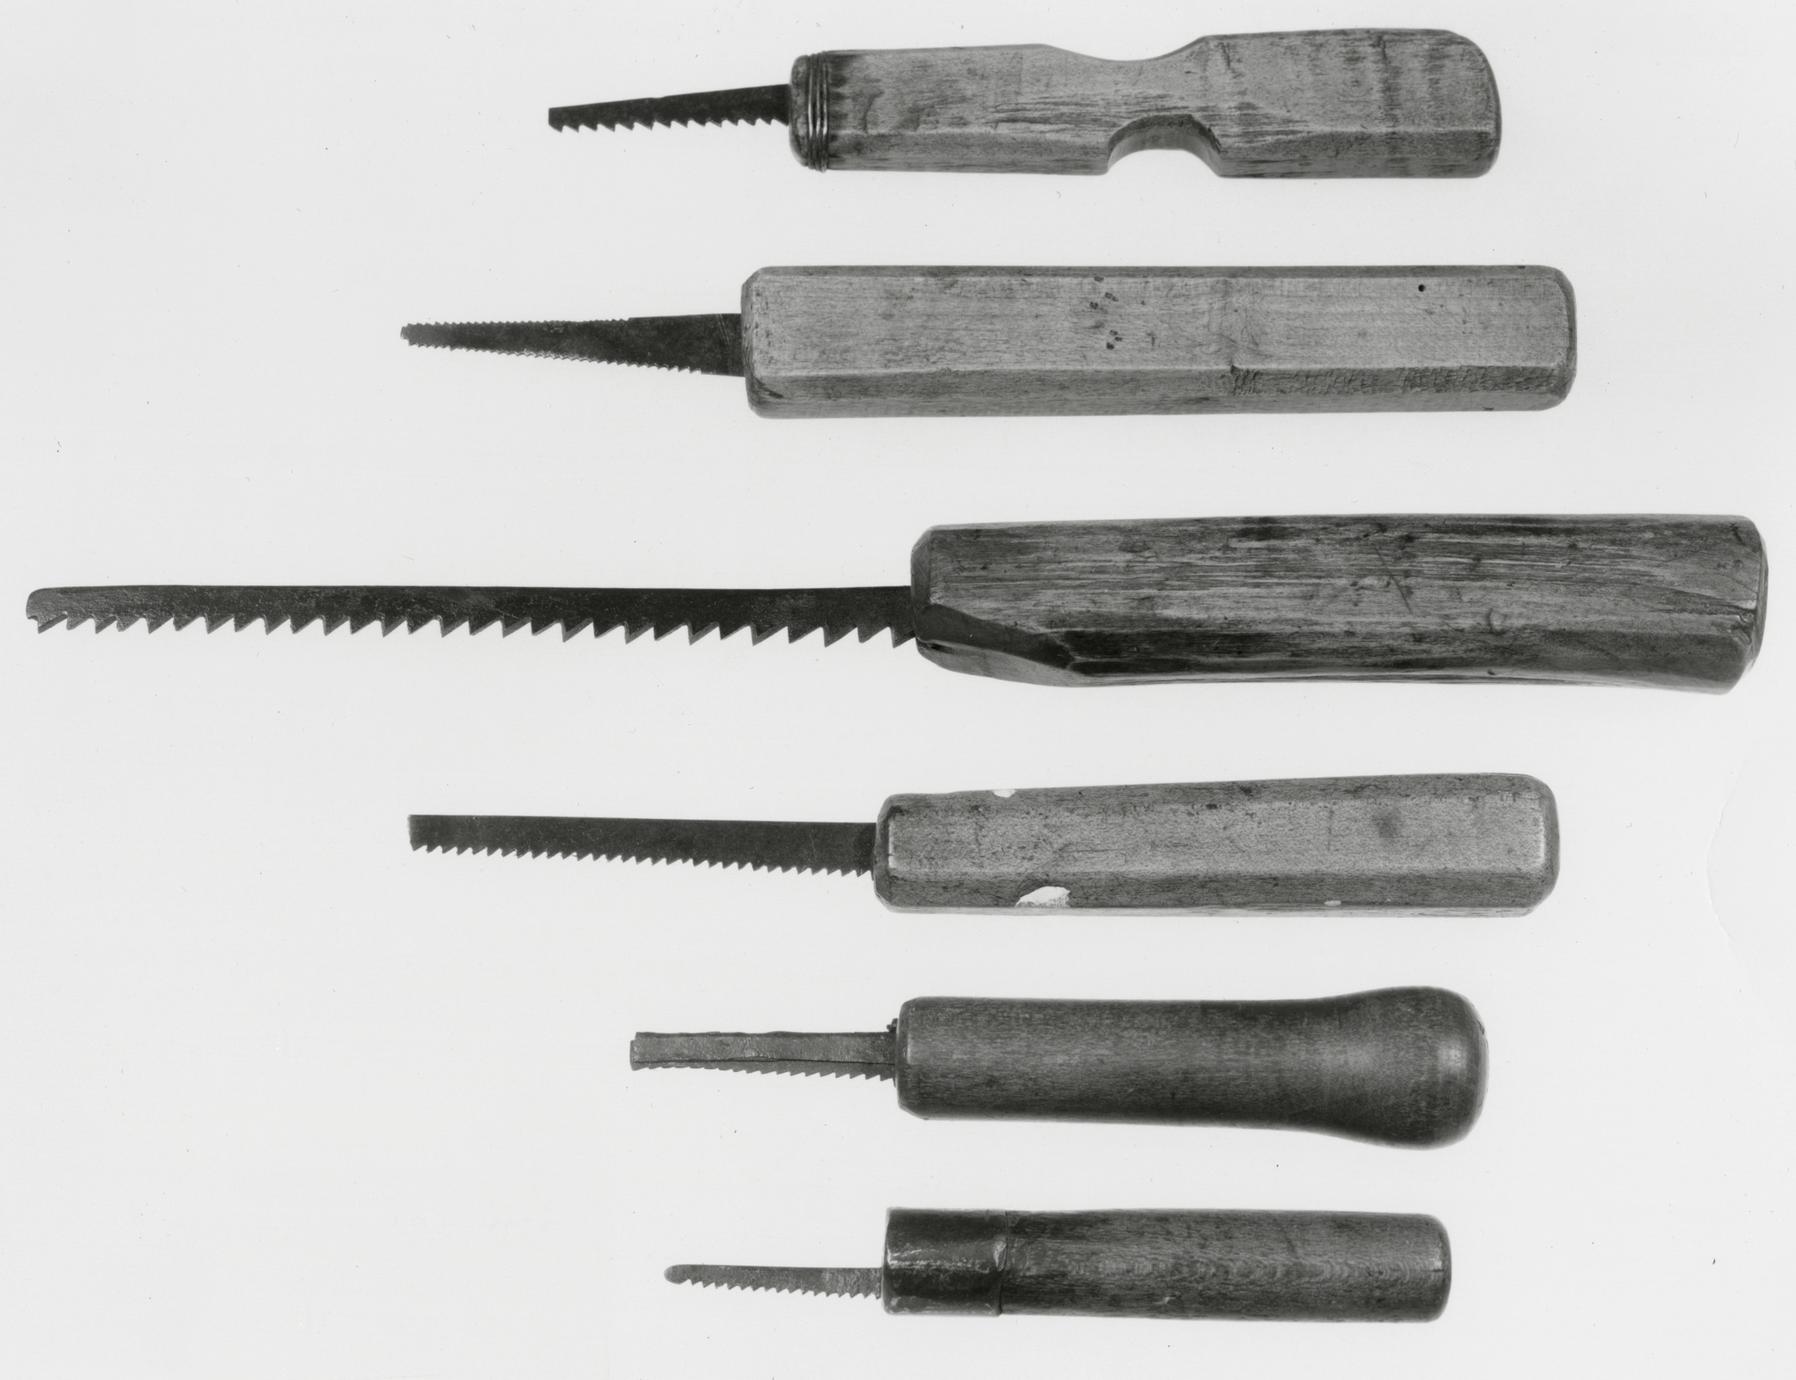 Black and white photo of various keyhole saws.